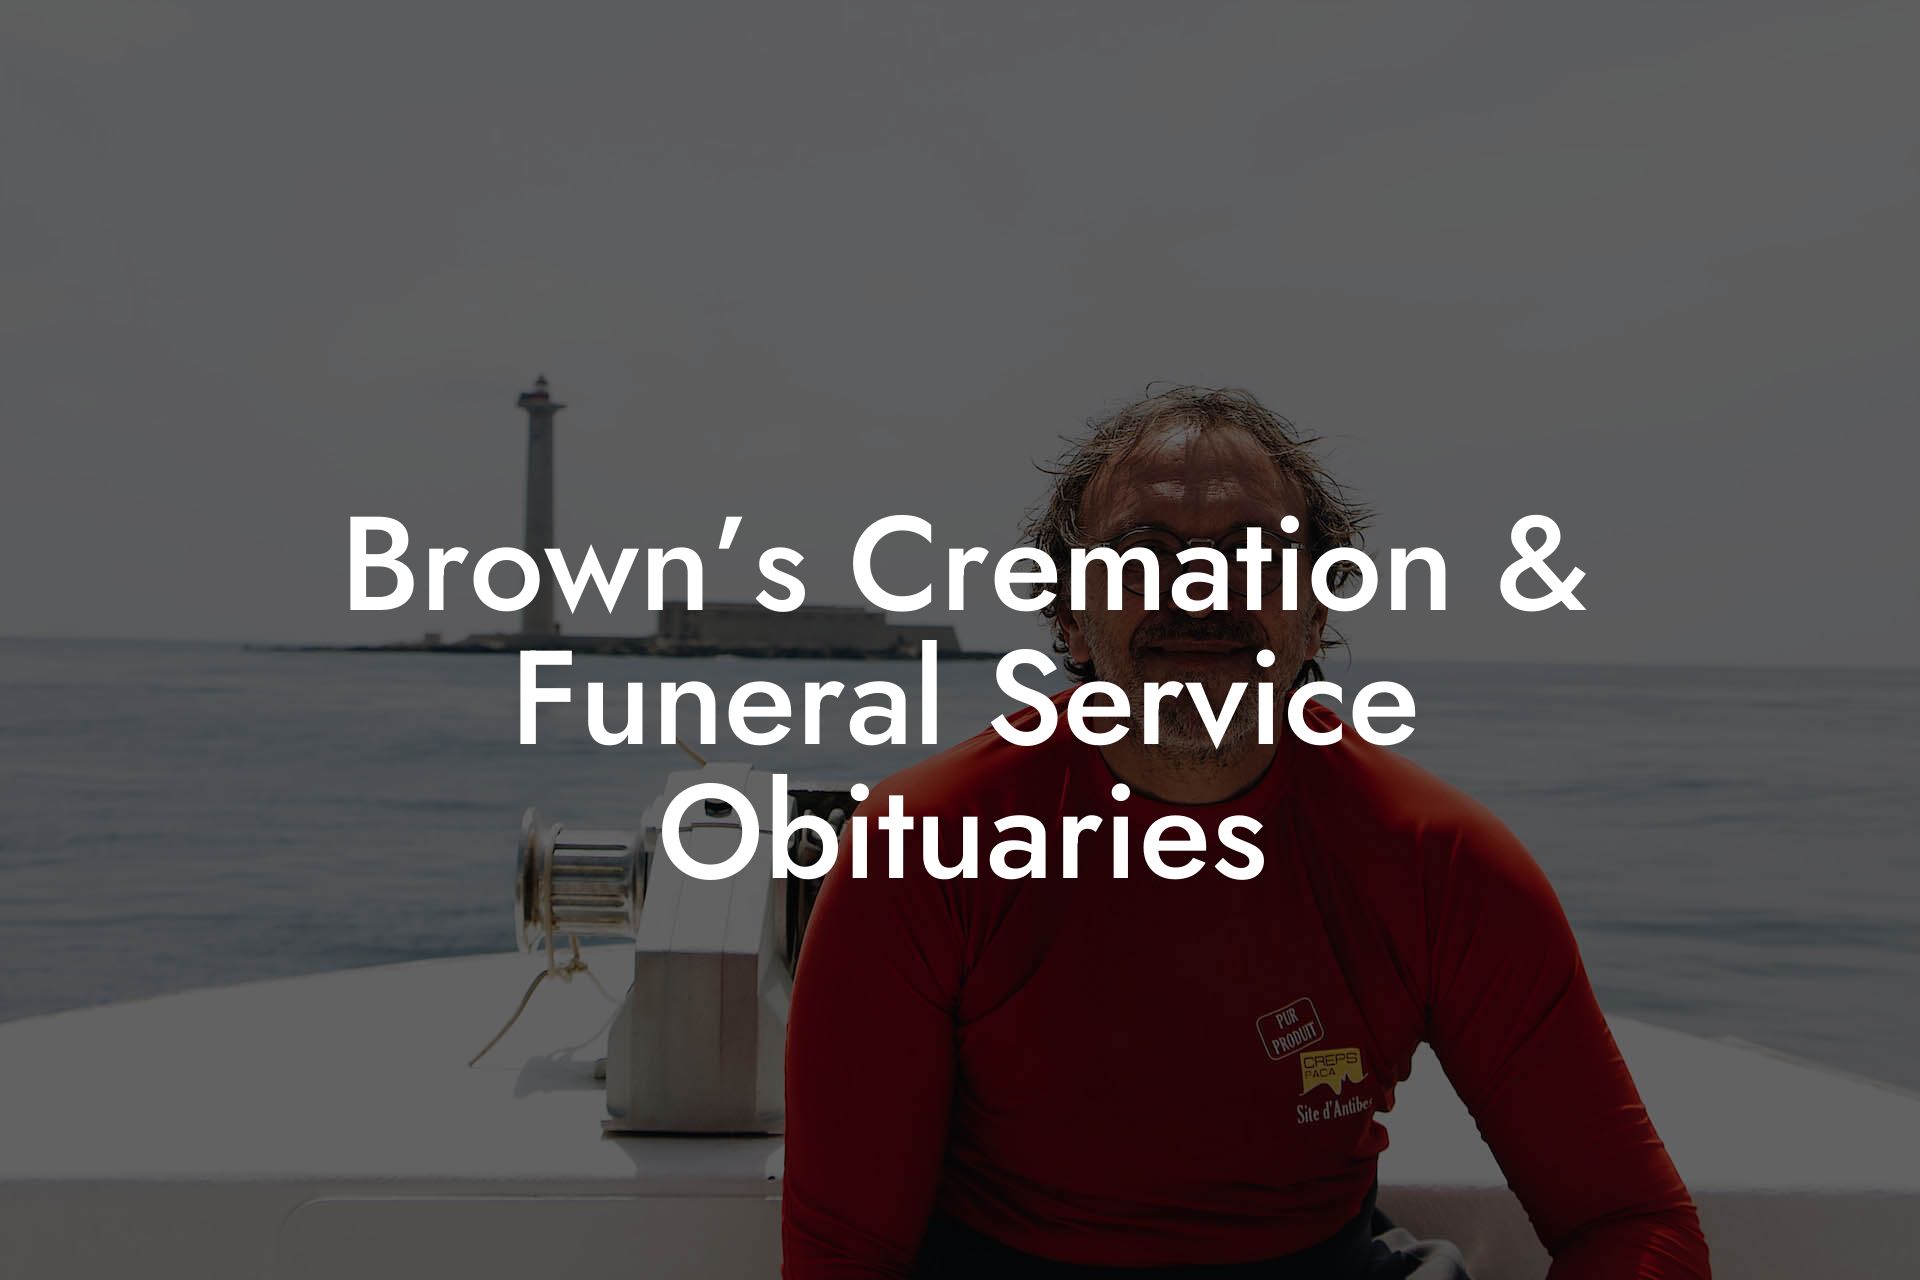 Brown’s Cremation & Funeral Service Obituaries